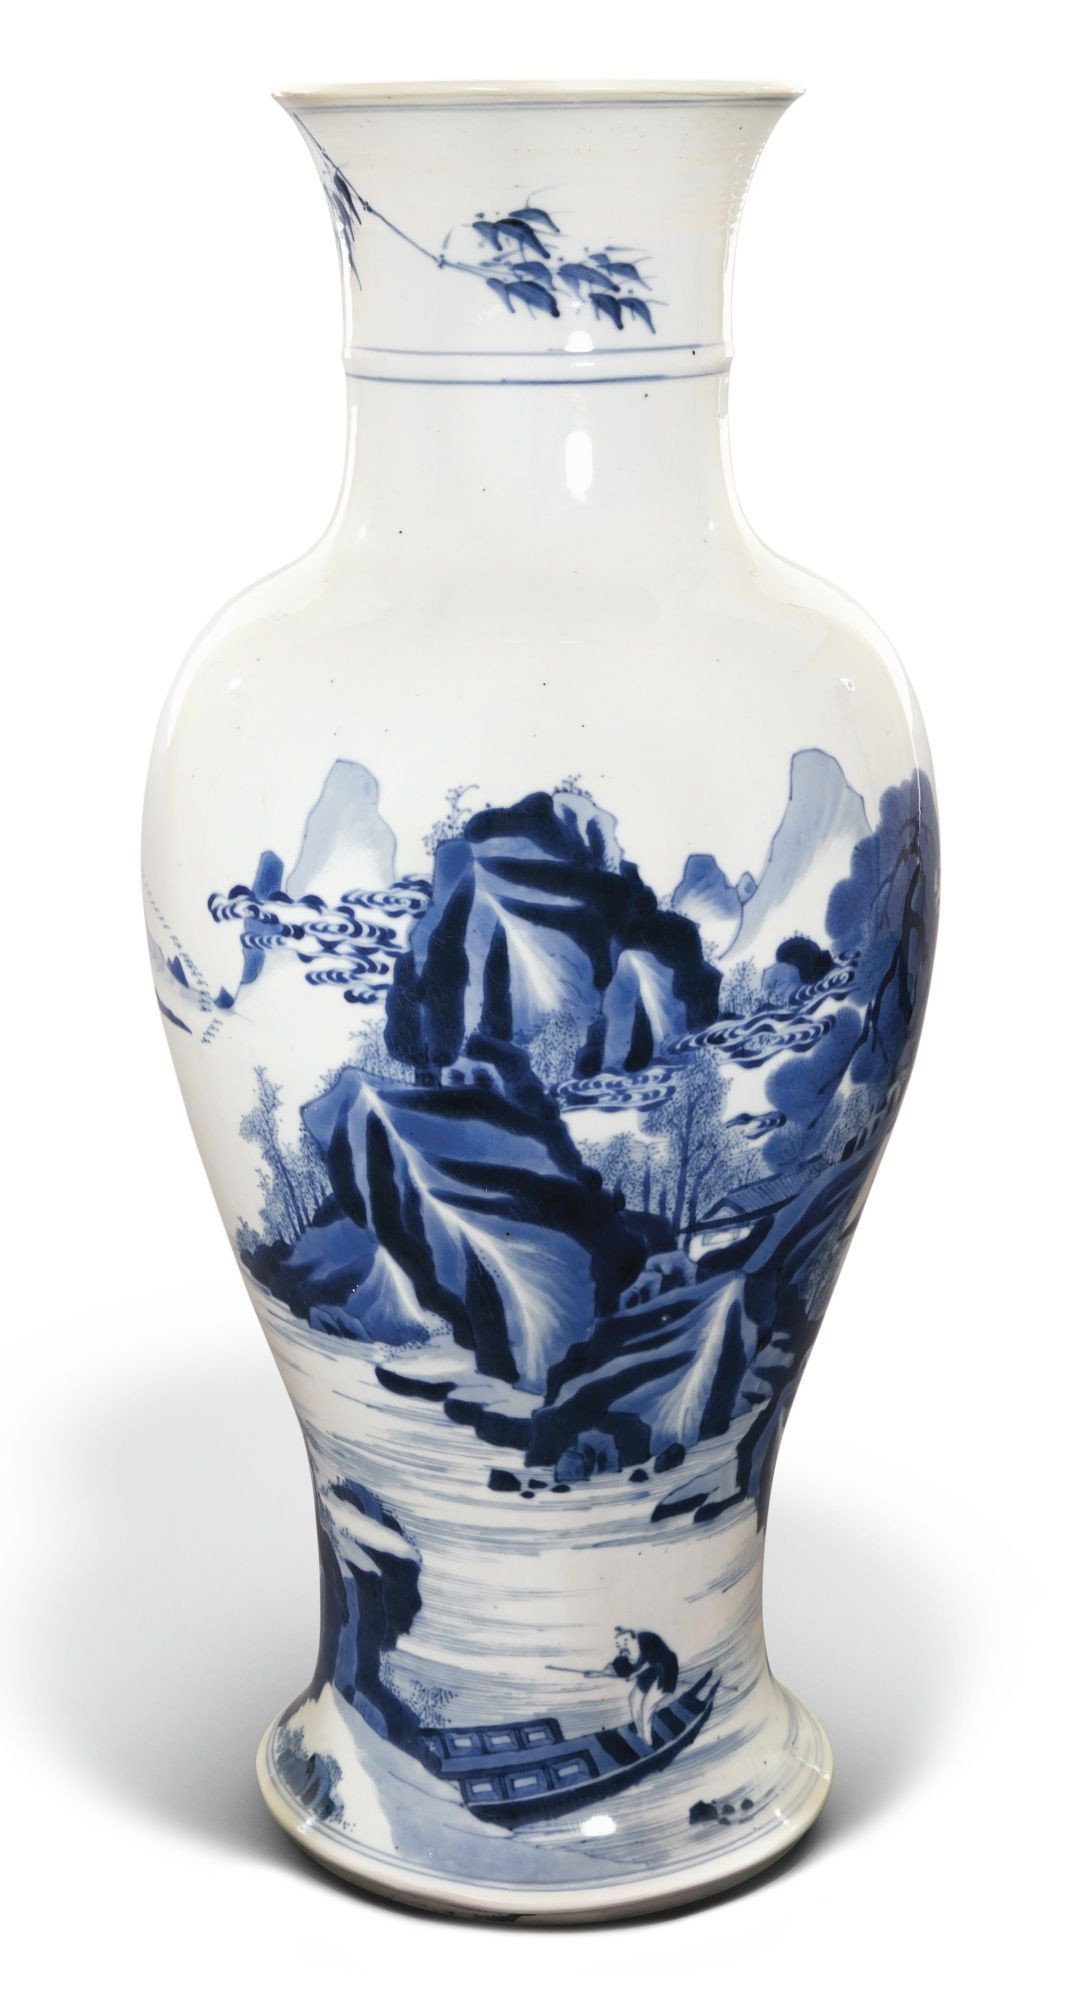 13 Unique Large Blue and White Floor Vase 2024 free download large blue and white floor vase of 32 wide mouth vase the weekly world in a large blue and white baluster vase qing dynasty kangxi period